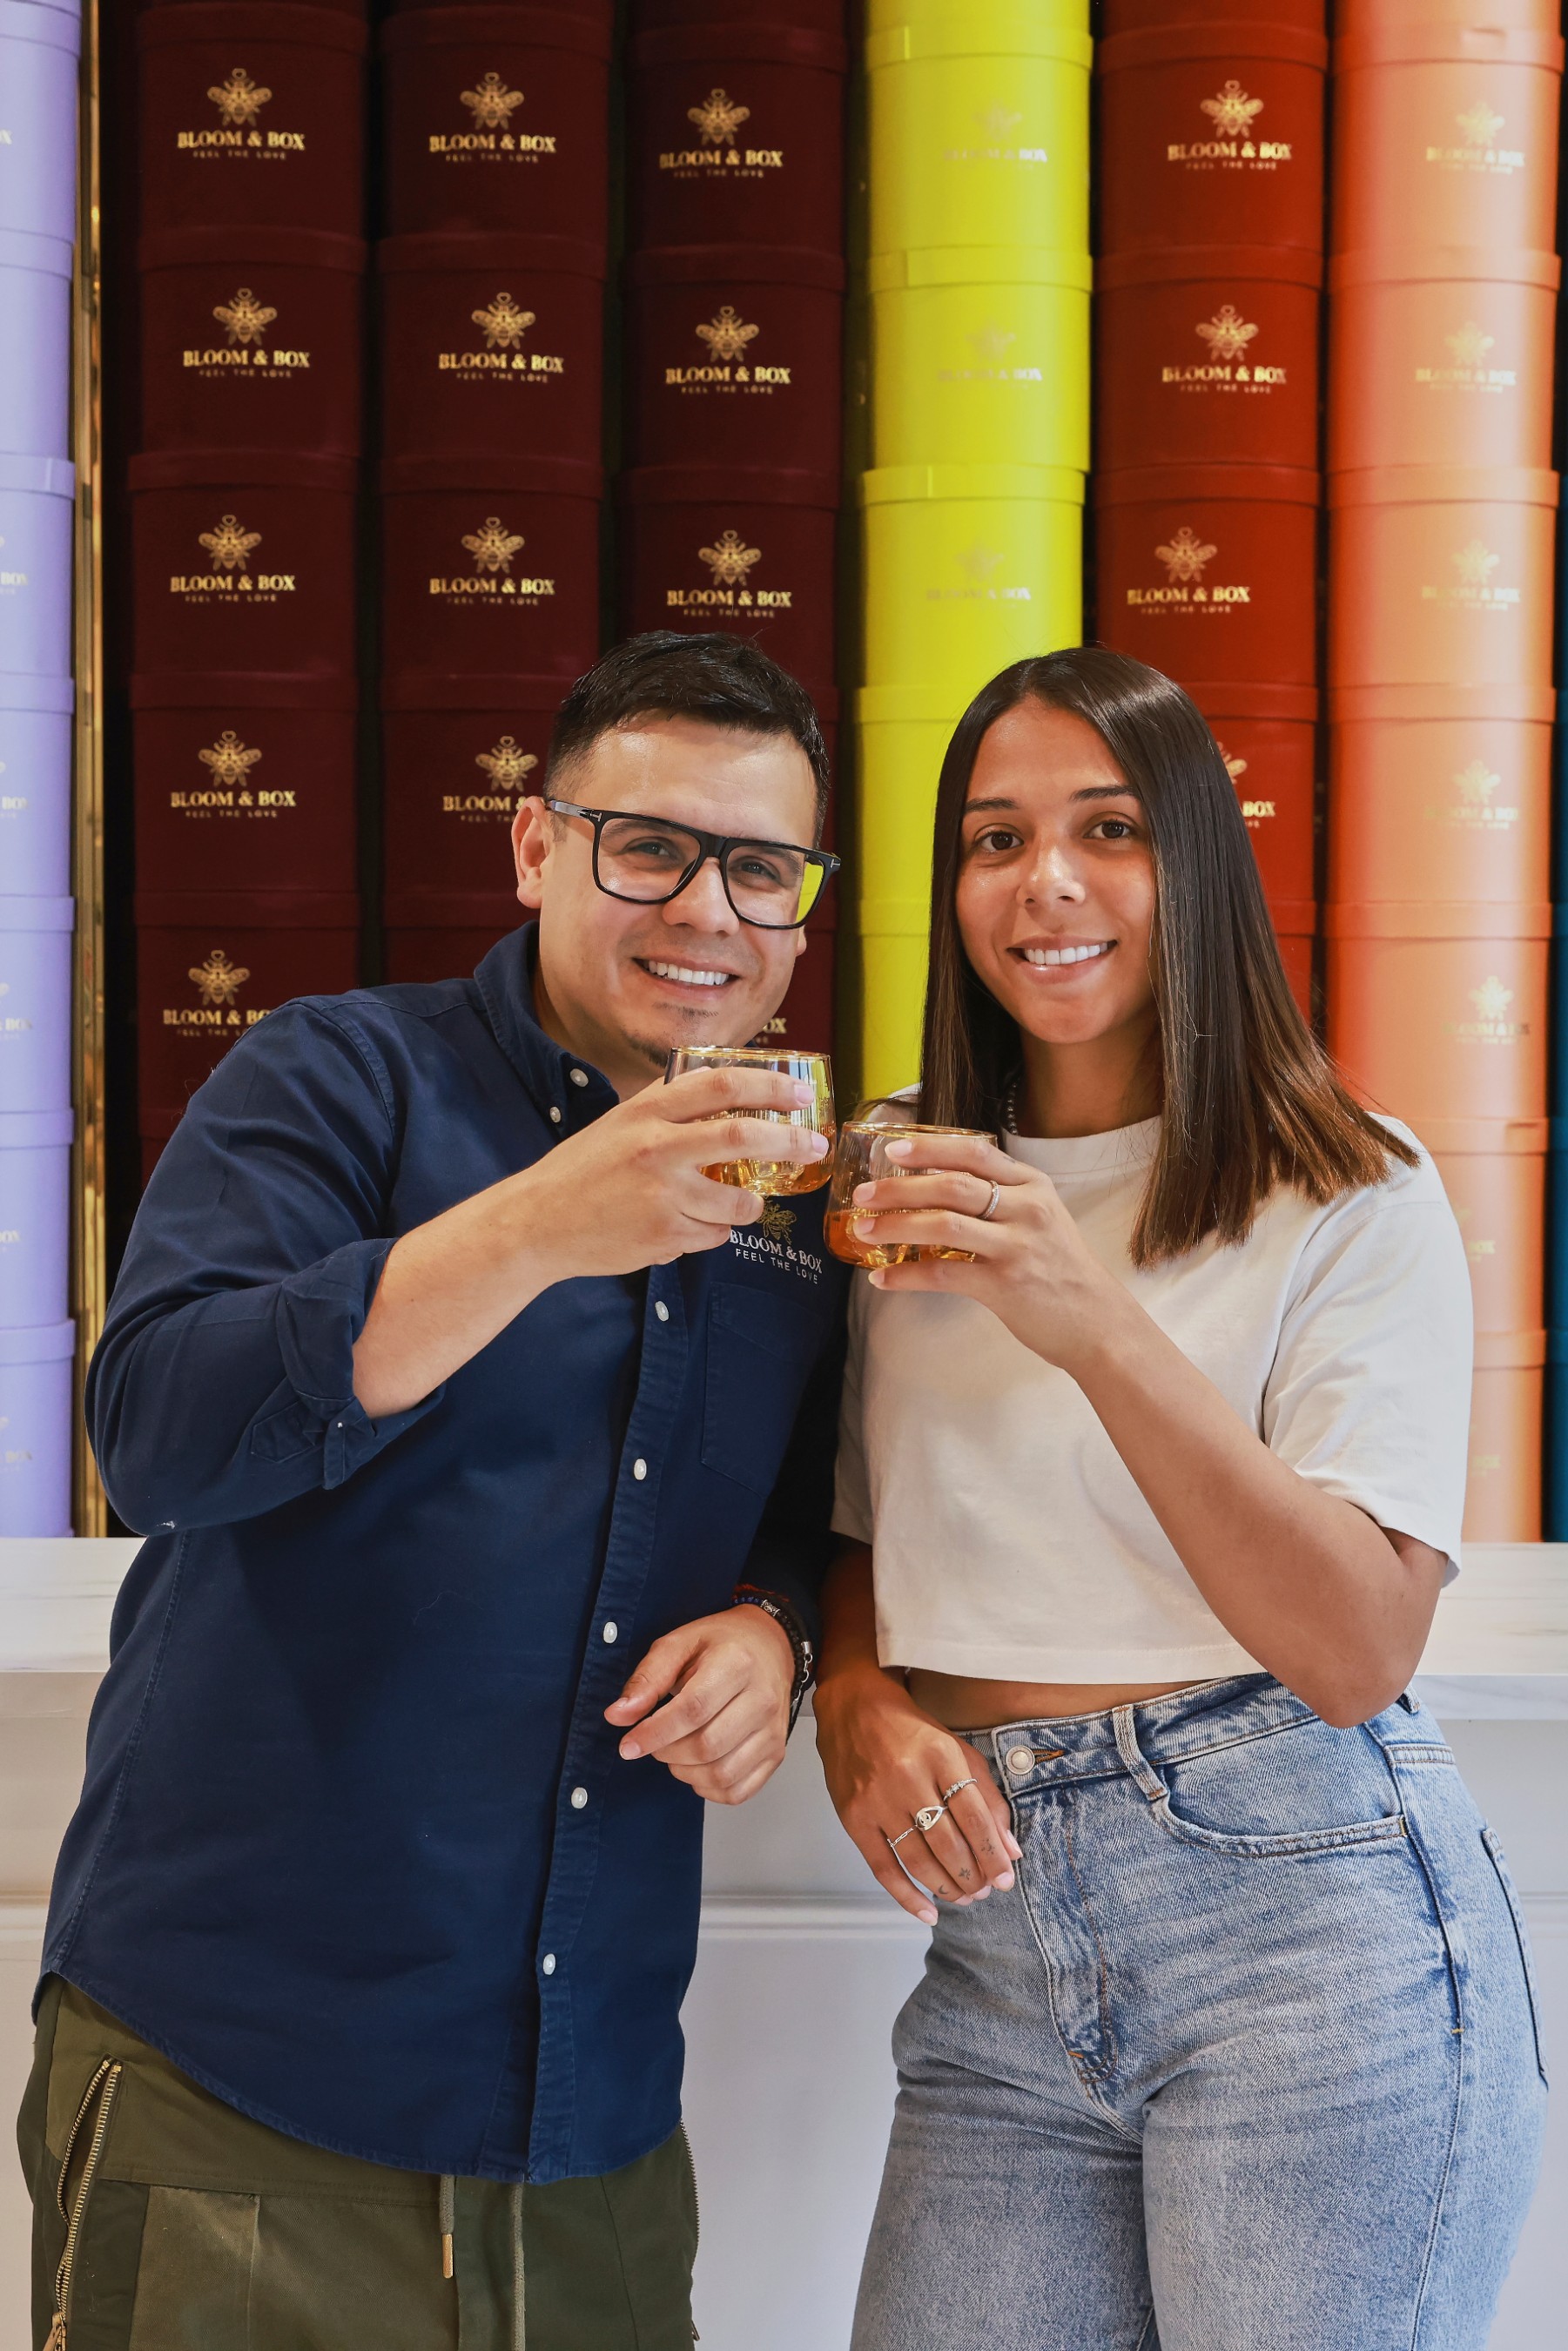 Mexican National Soccer Team Player, María Sánchez and Houston's Bloom & Box Owner Raise a Glass of Buchanan’s Scotch Whisky to the 200% Futuro